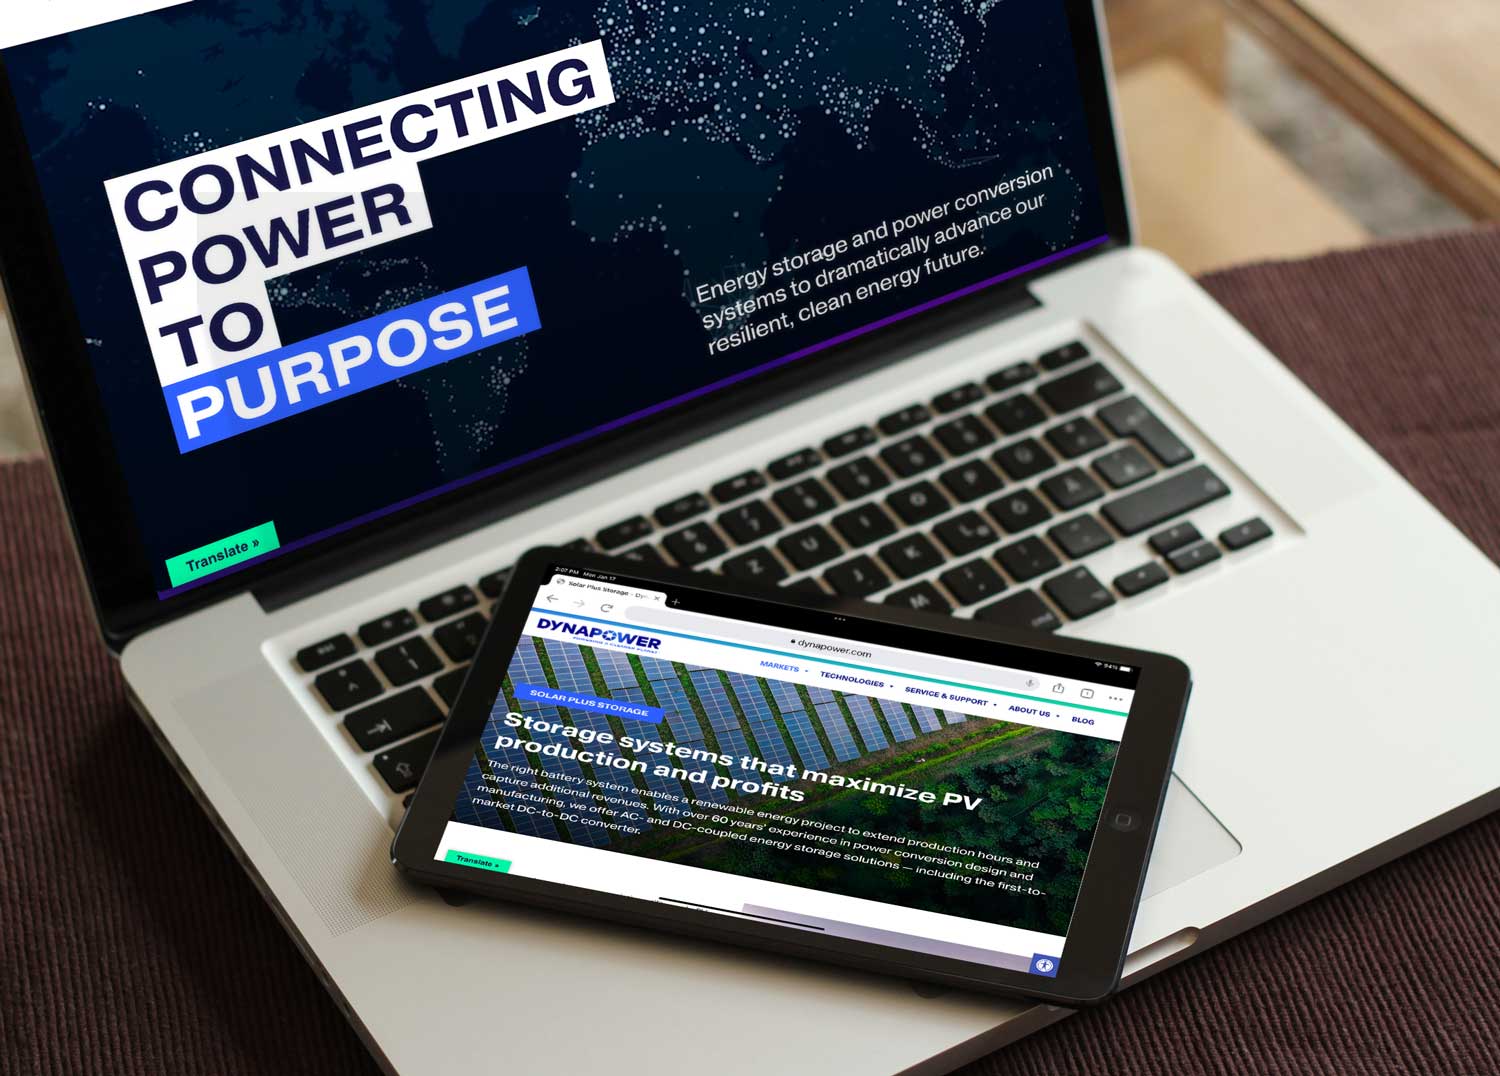 Dynapower website shown on a laptop computer and a tablet